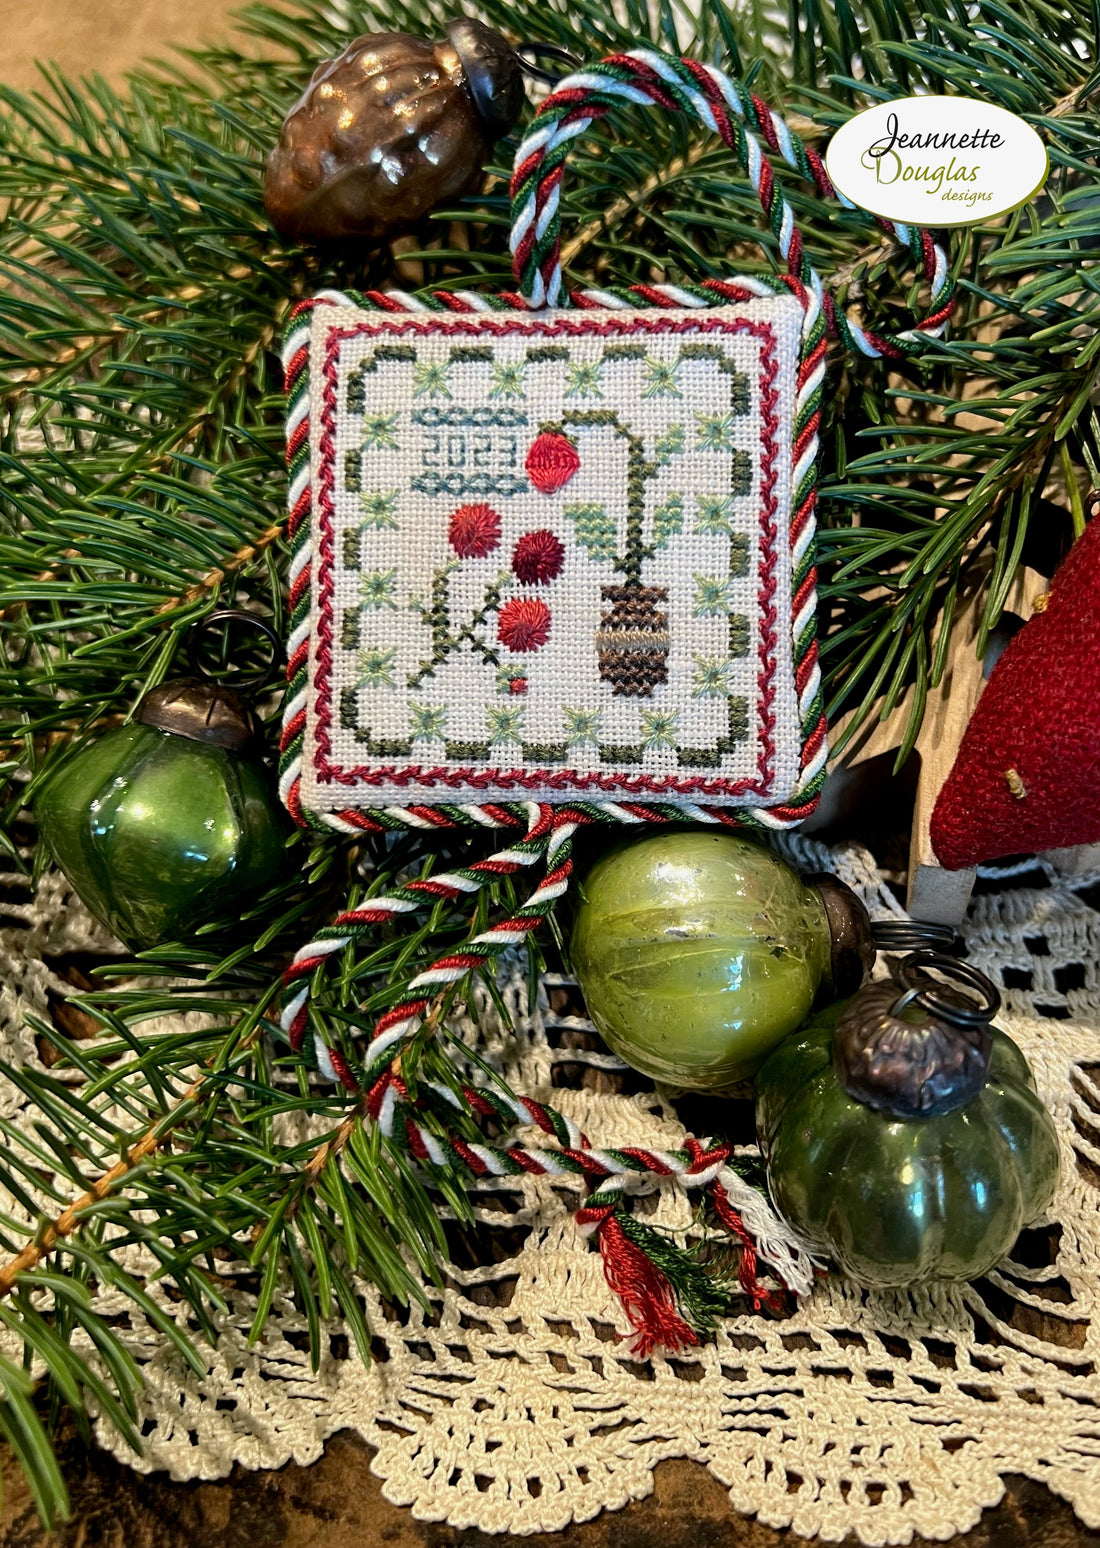 Learn Your Specialty Stitches Class with Jeannette Douglas